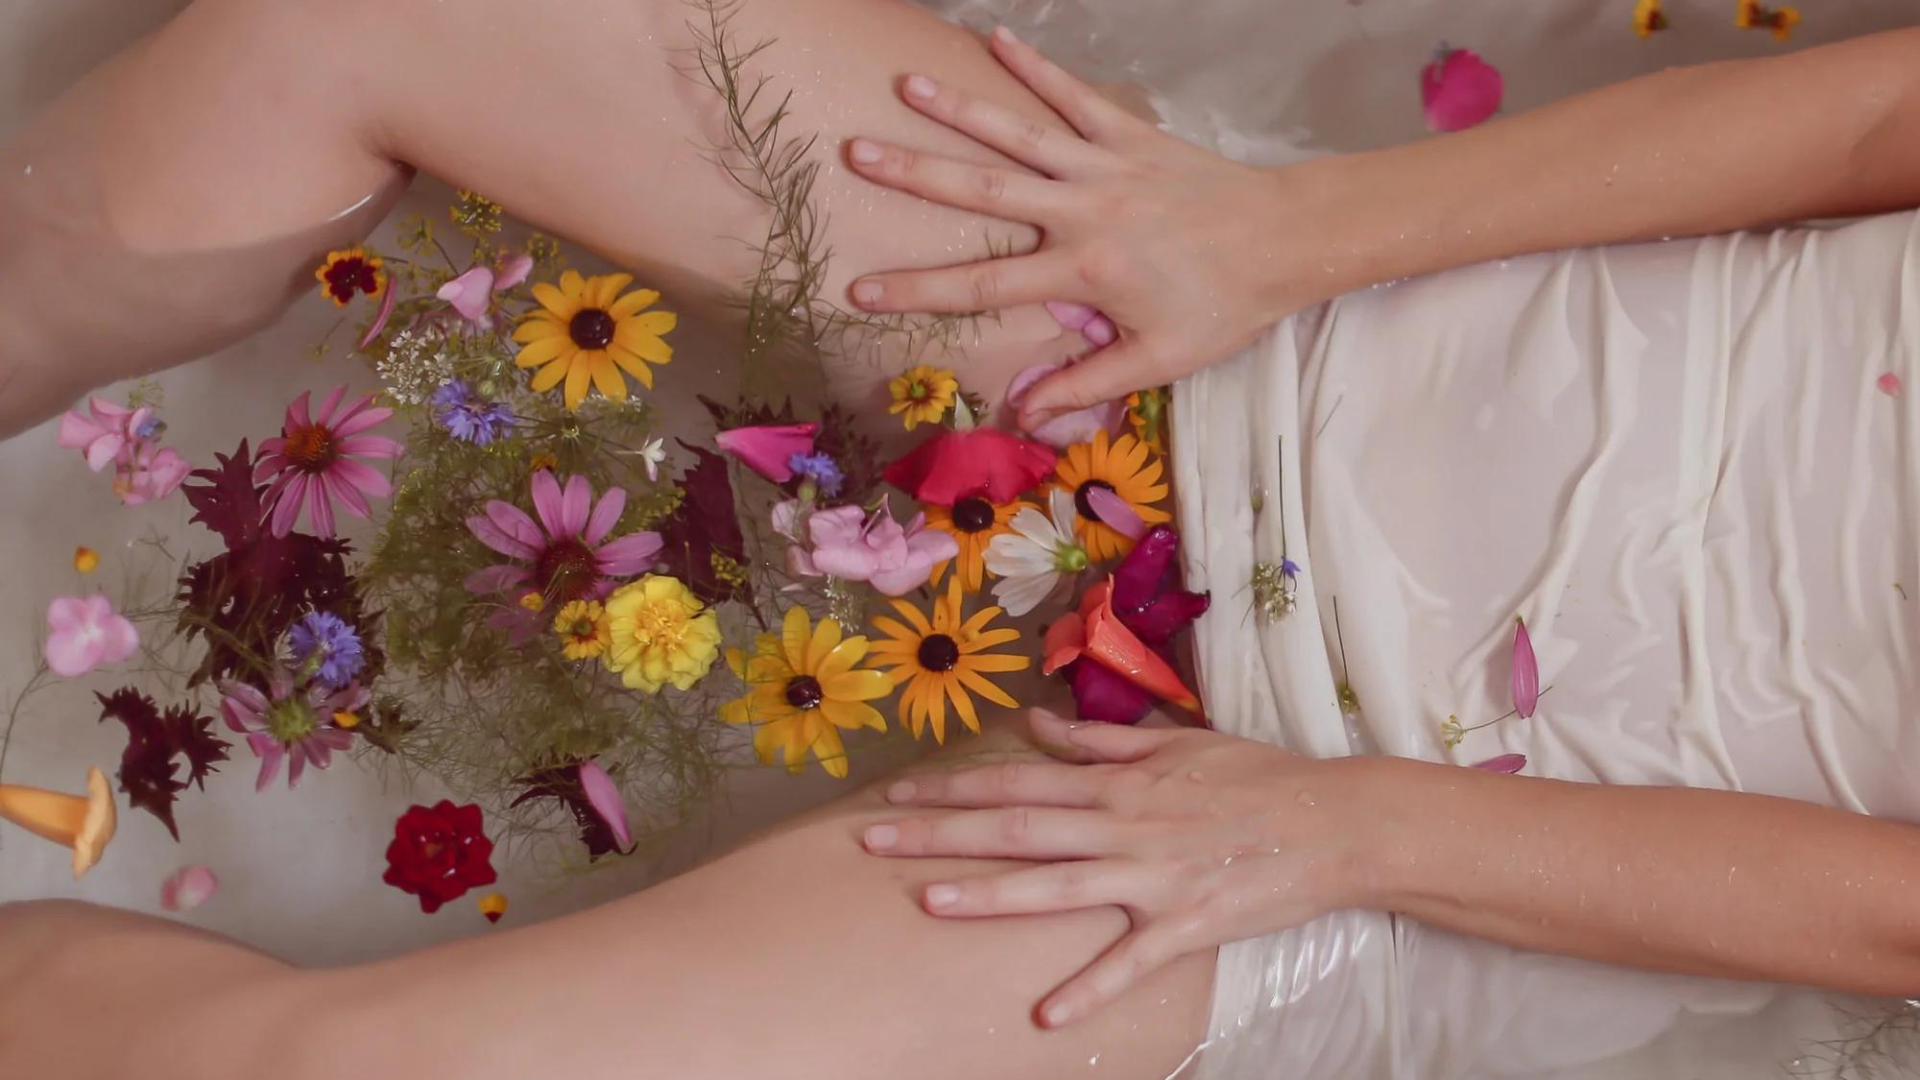 A woman in the bath tub filled with different flowers